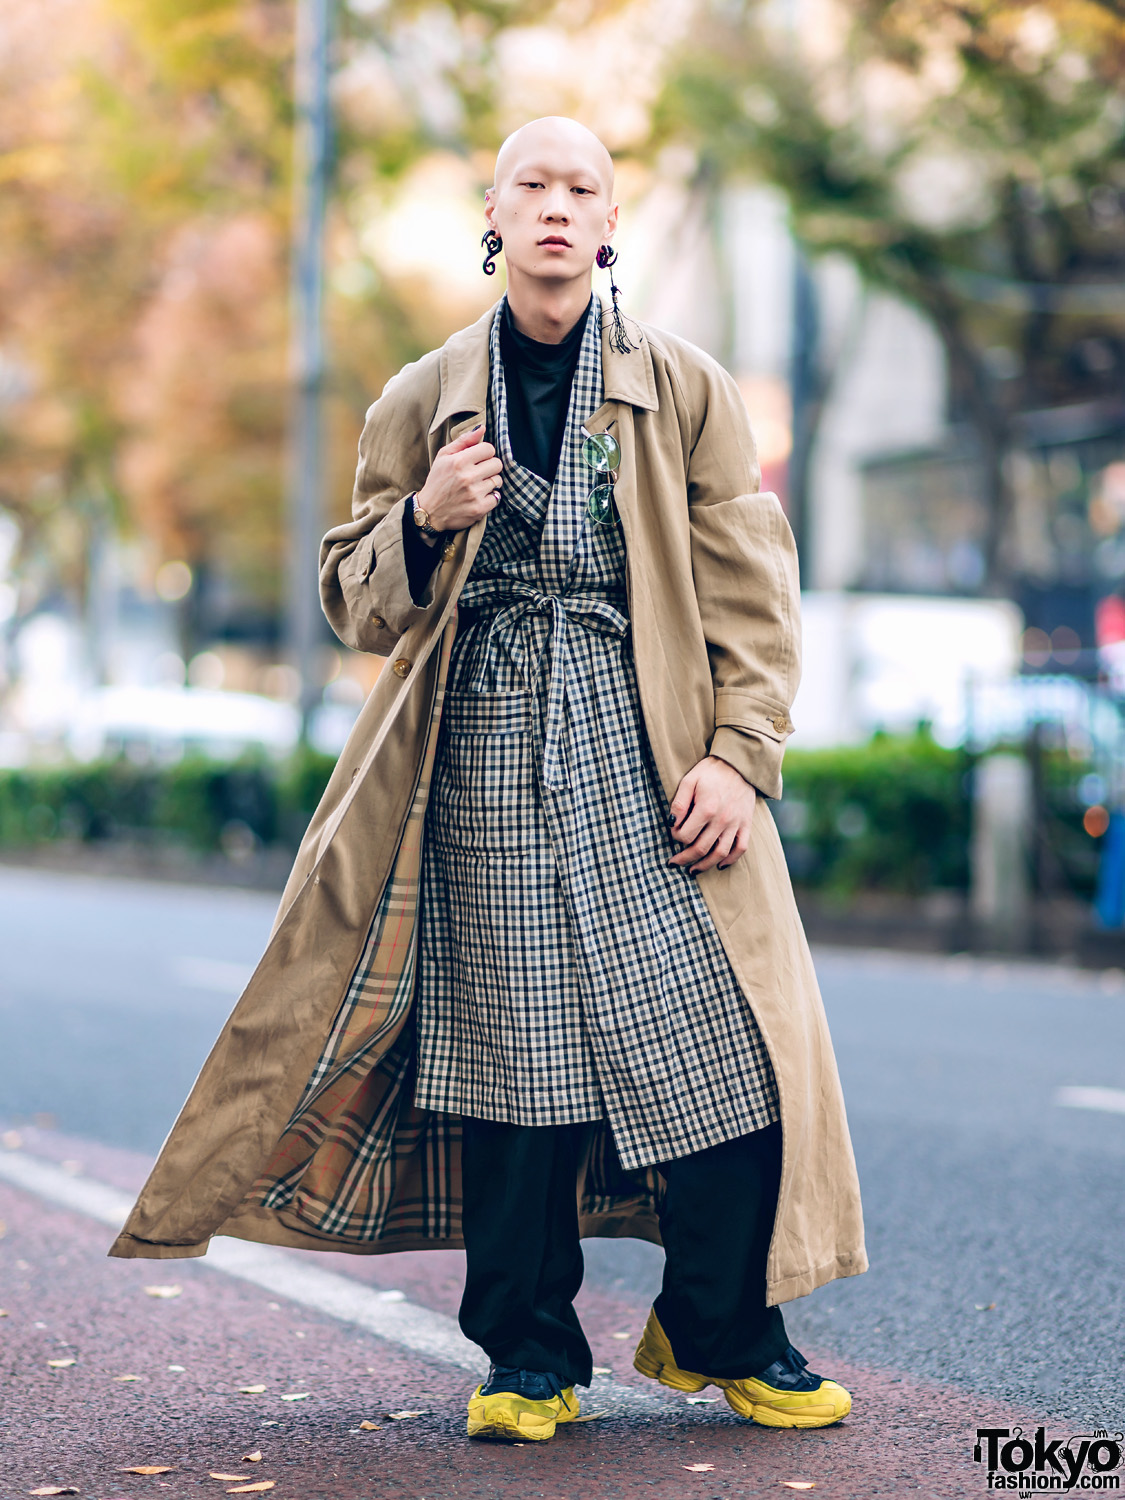 All Black Men's Winter Street Style W/ Burberry Trench Coat, Y-3, Notch  Wide Pants, Whoop-De-Doo Shoes SAAD Pointy Glasses – Tokyo Fashion |  